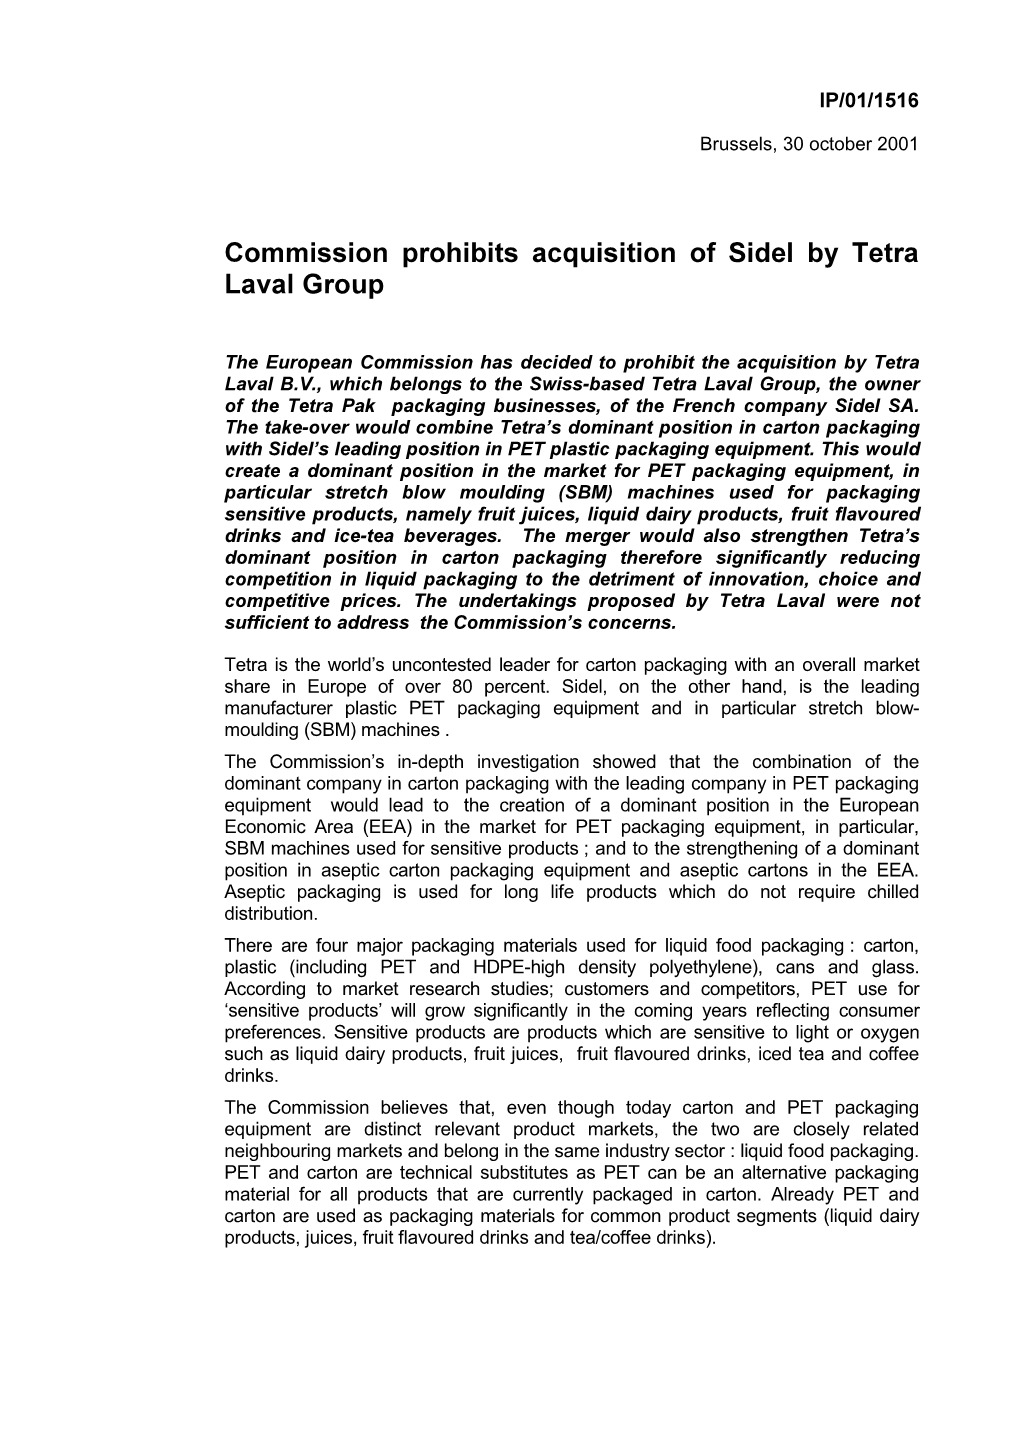 Commission Prohibits Acquisition of Sidel by Tetra Laval Group